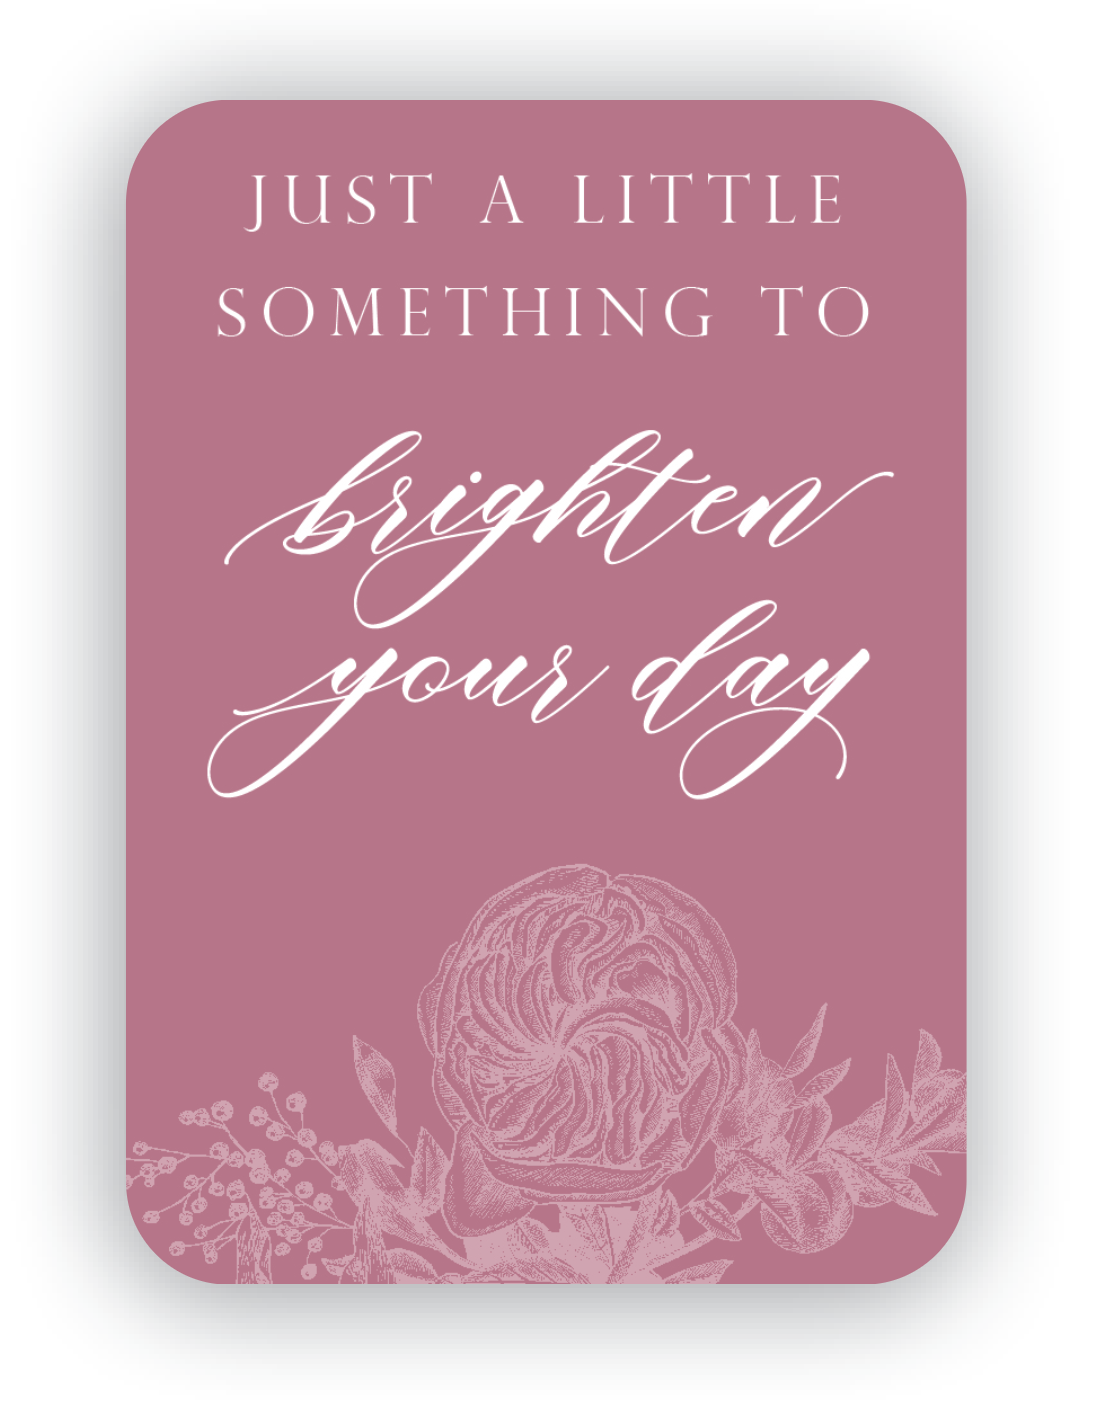 Digital dusty rose mini card with florals that says "Just a little something to brighten your day" by Rust Belt Love